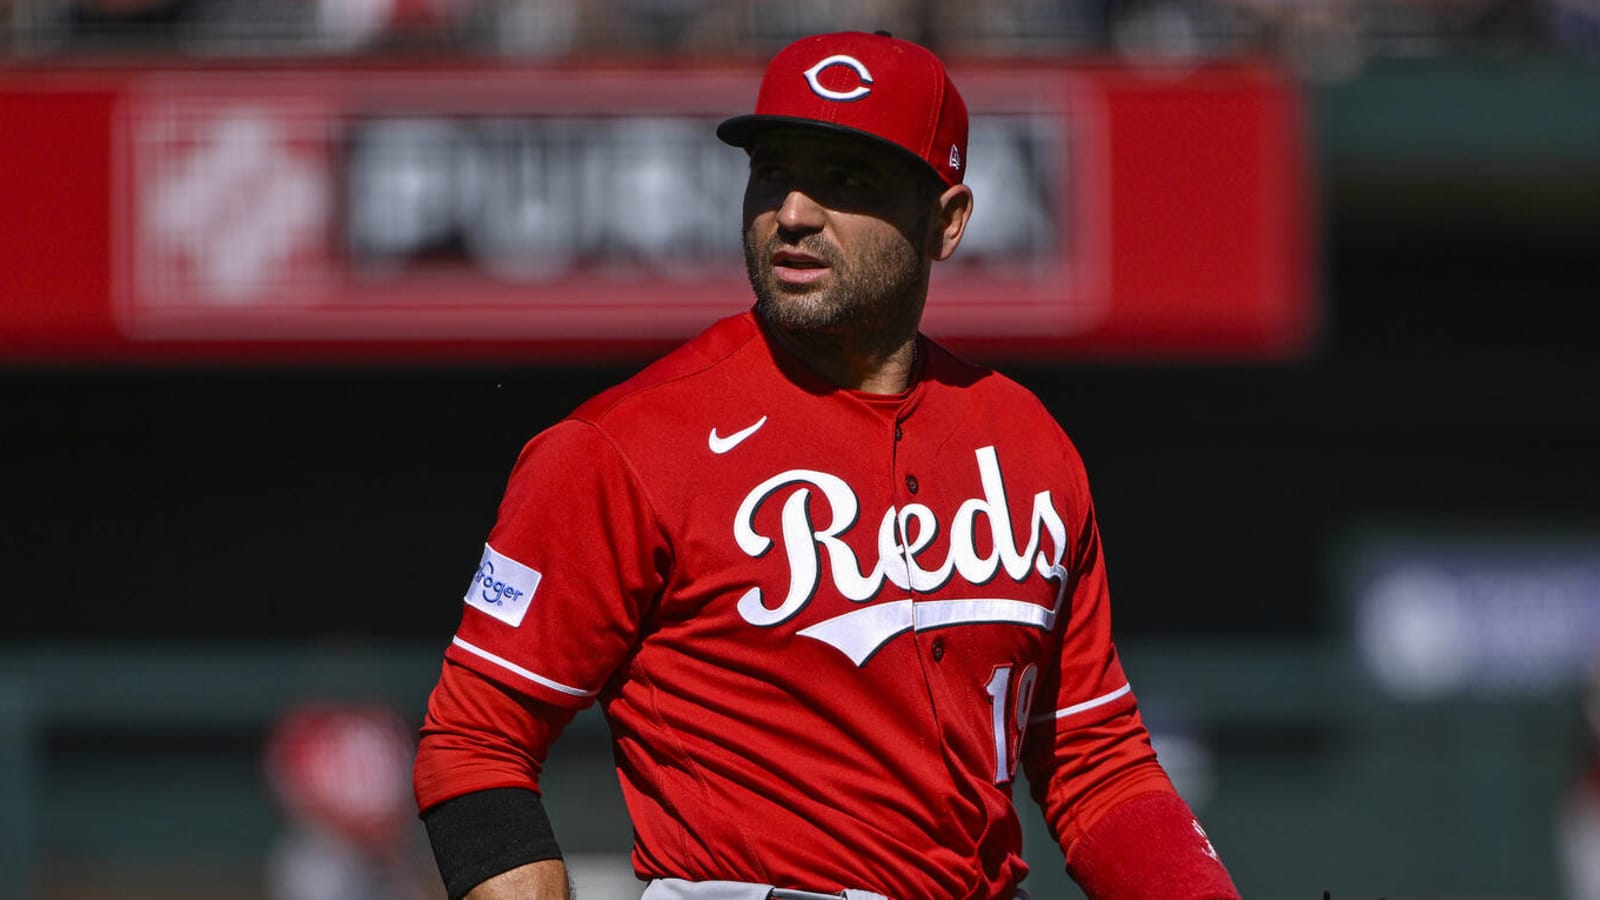 Nick Krall gets candid on Joey Votto's future with Reds